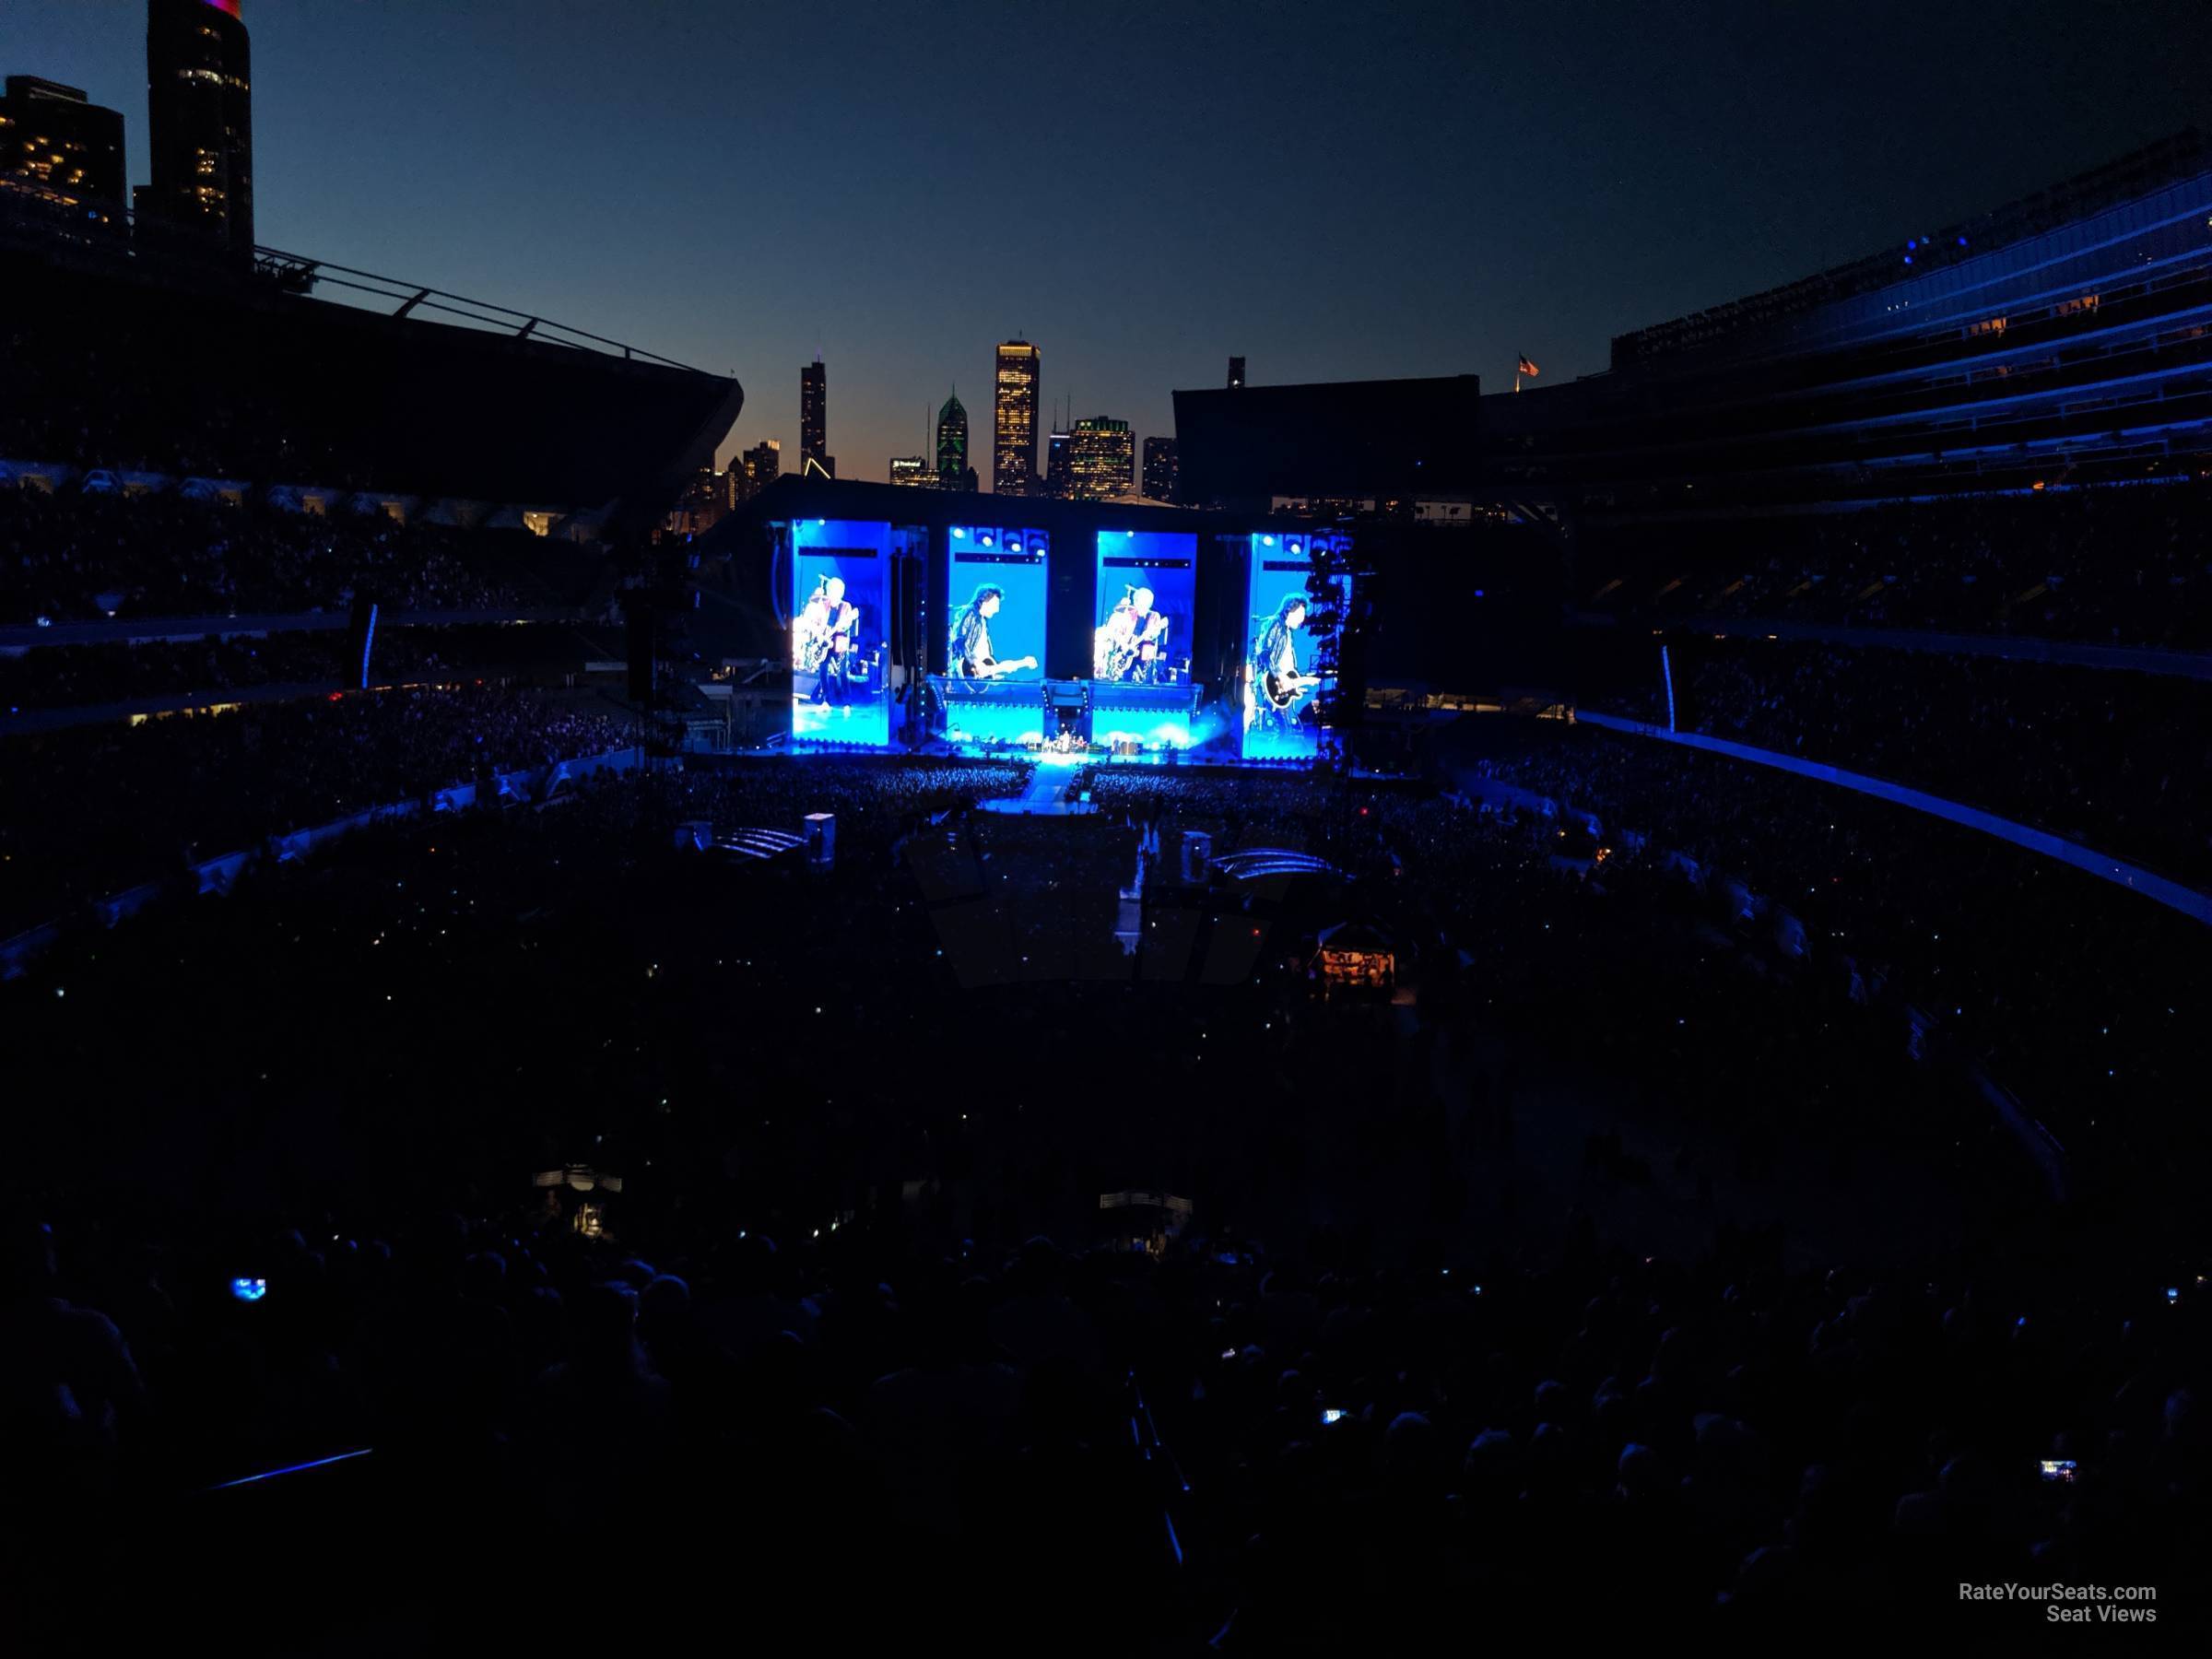 section 322, row 8 seat view  for concert - soldier field